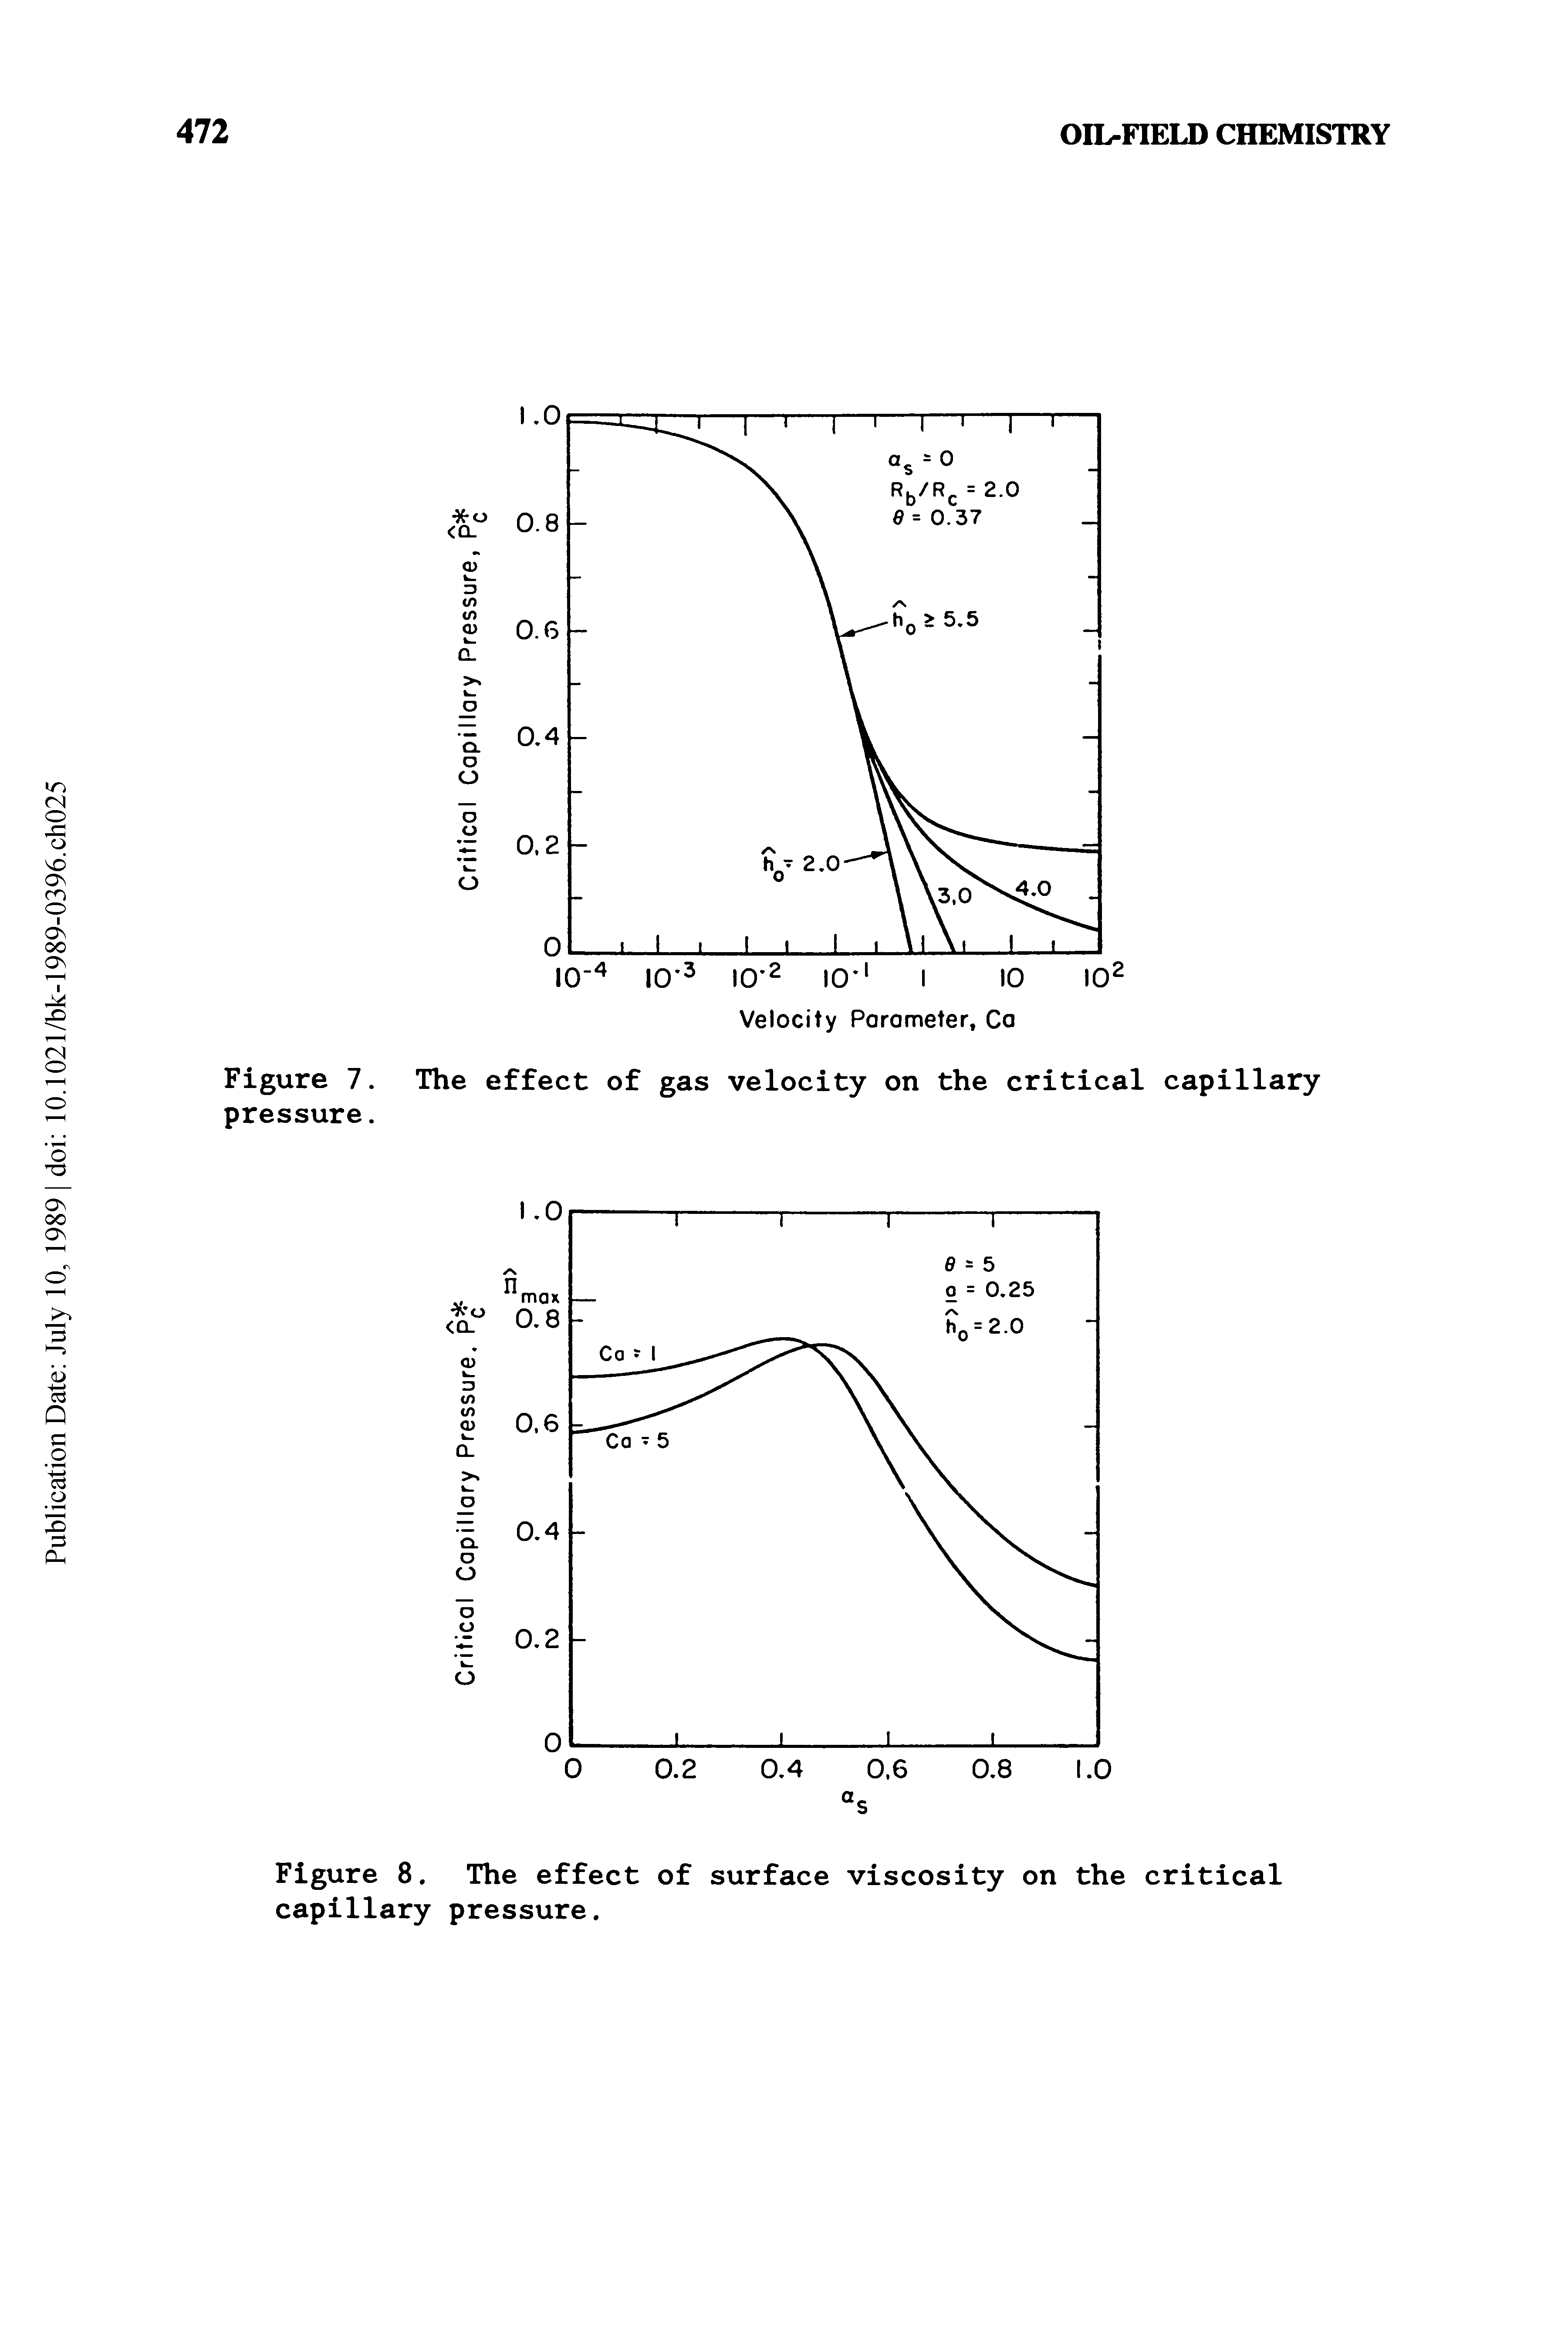 Figure 7. The effect of gas velocity on the critical capillary pressure.